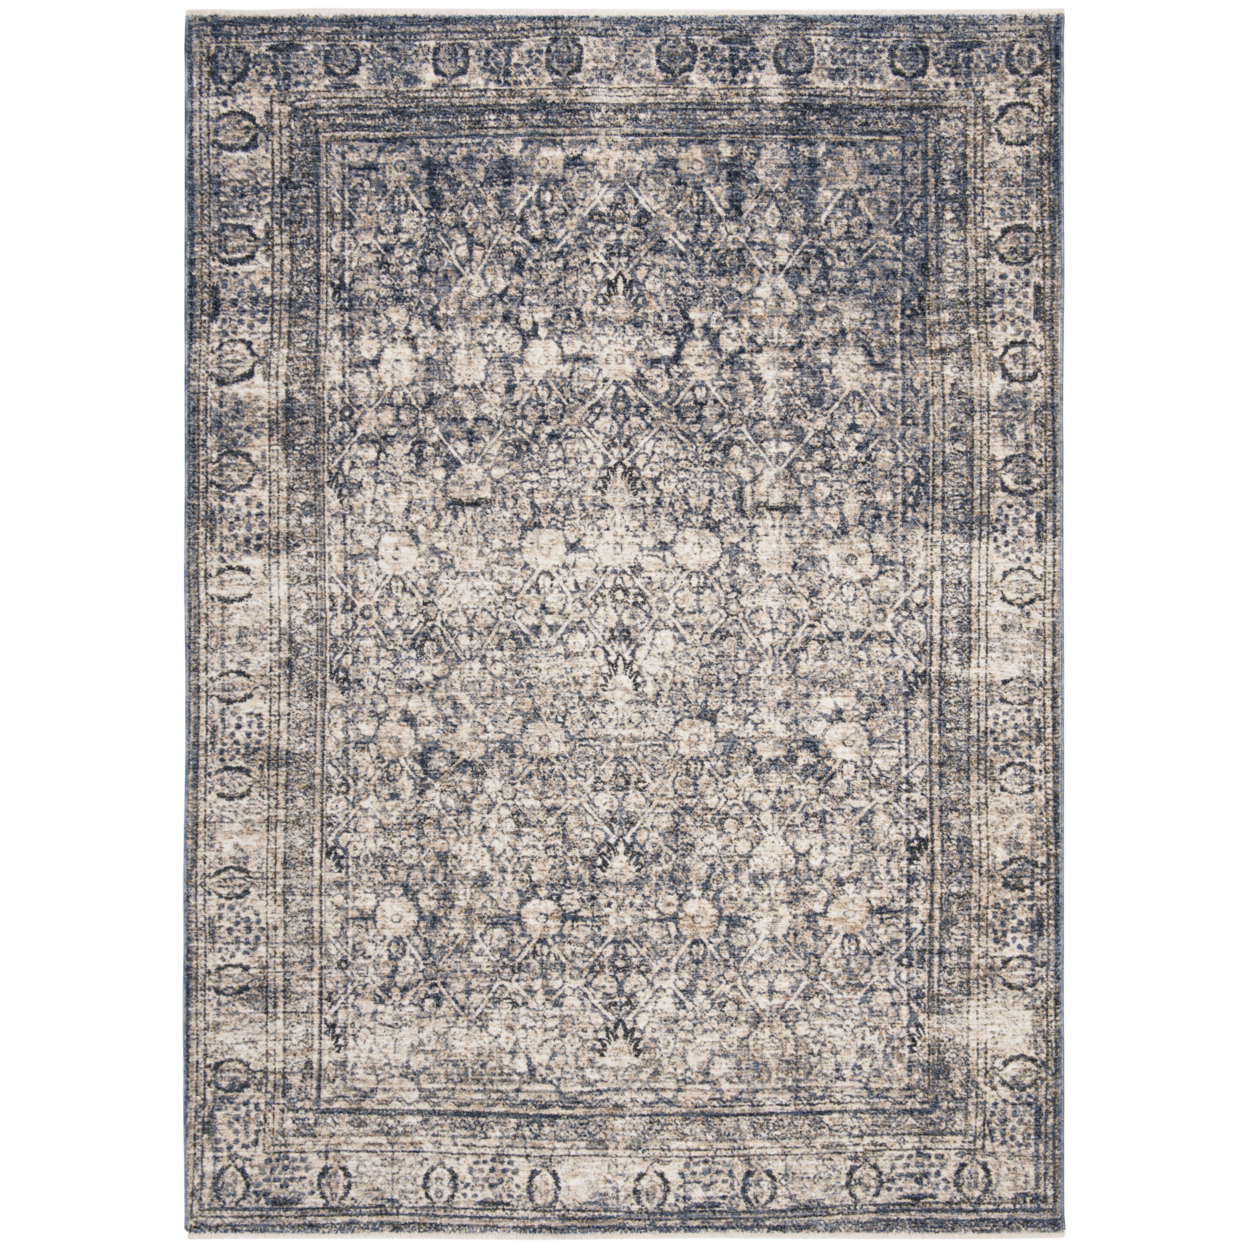 SAFAVIEH Vintage Oushak Collection VOS233M Navy/Ivory Rug - image 1 of 5